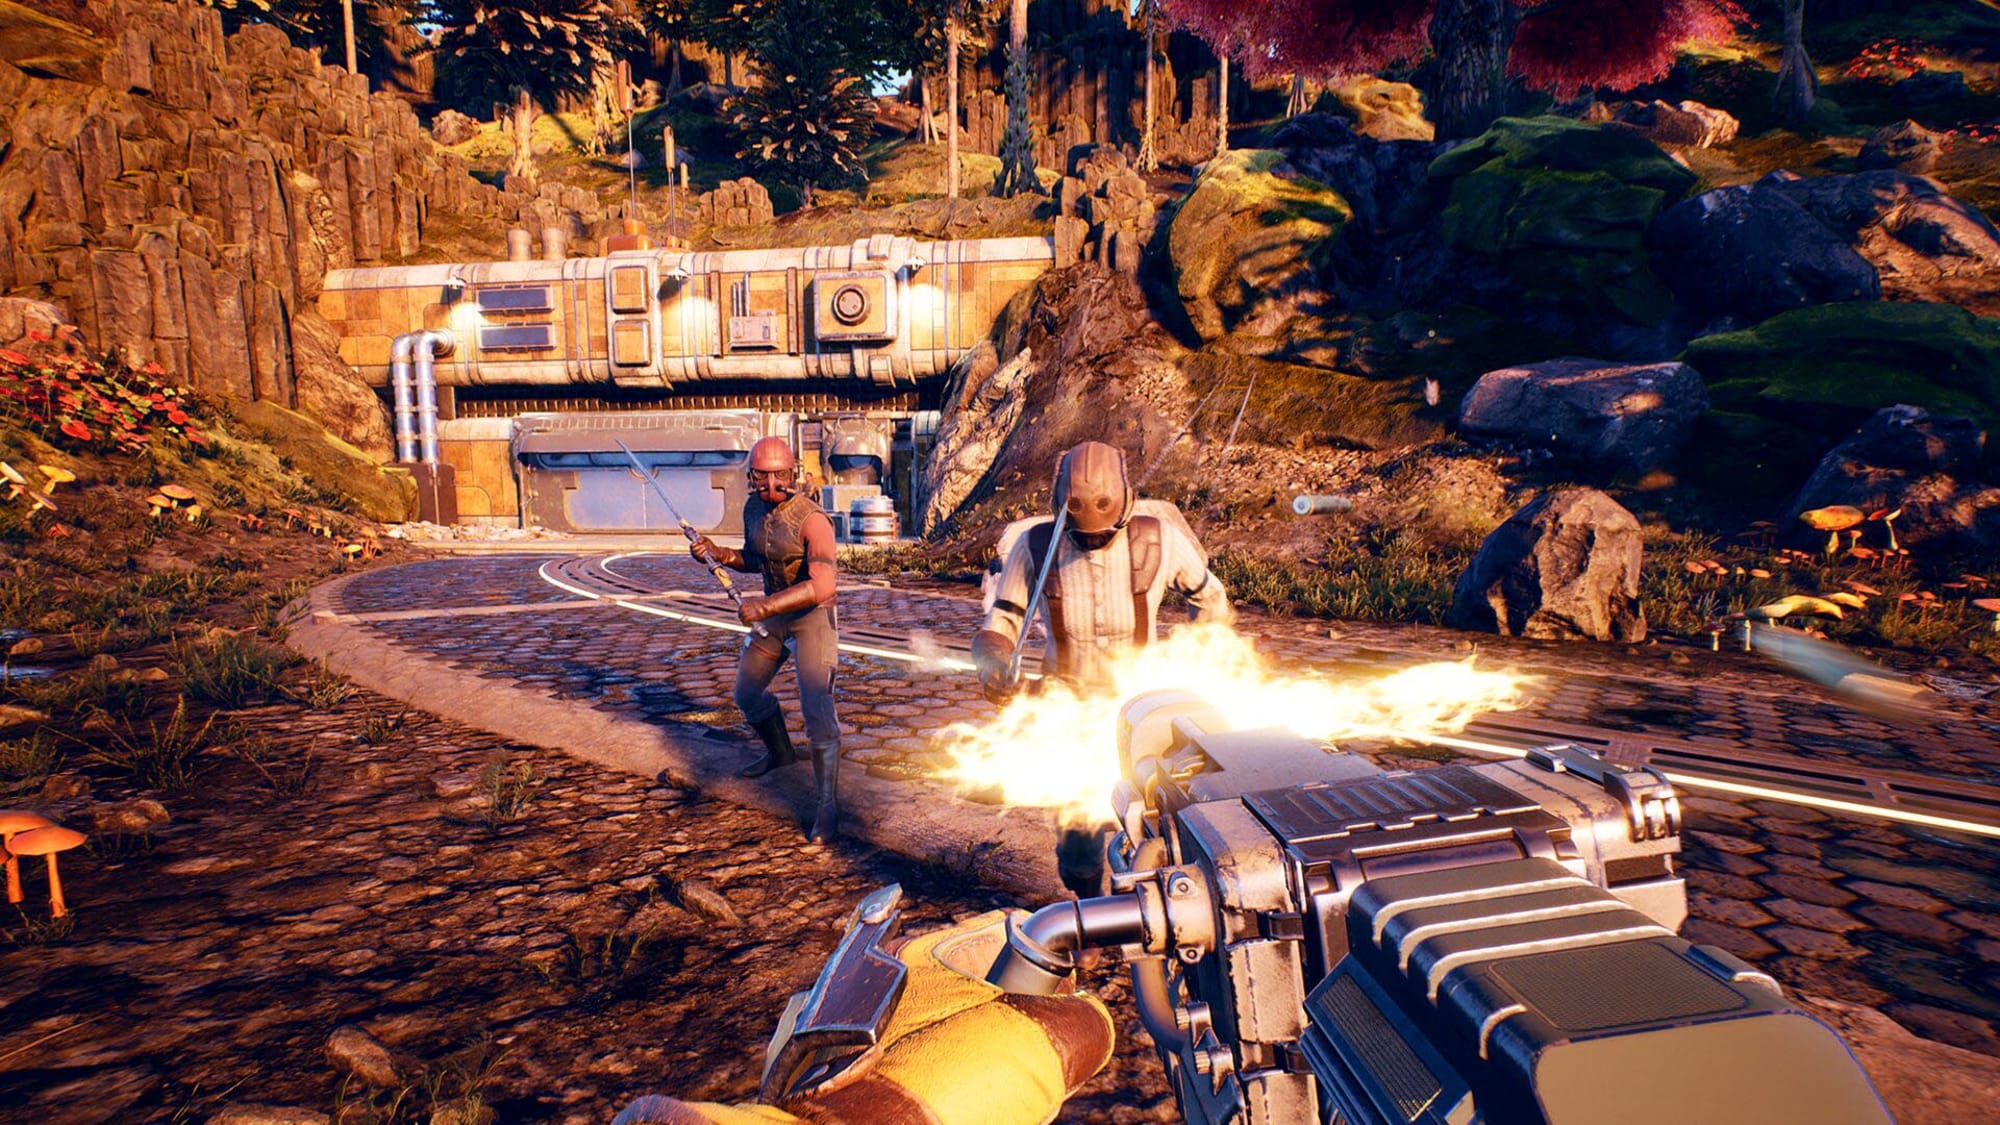 Review: The Outer Worlds